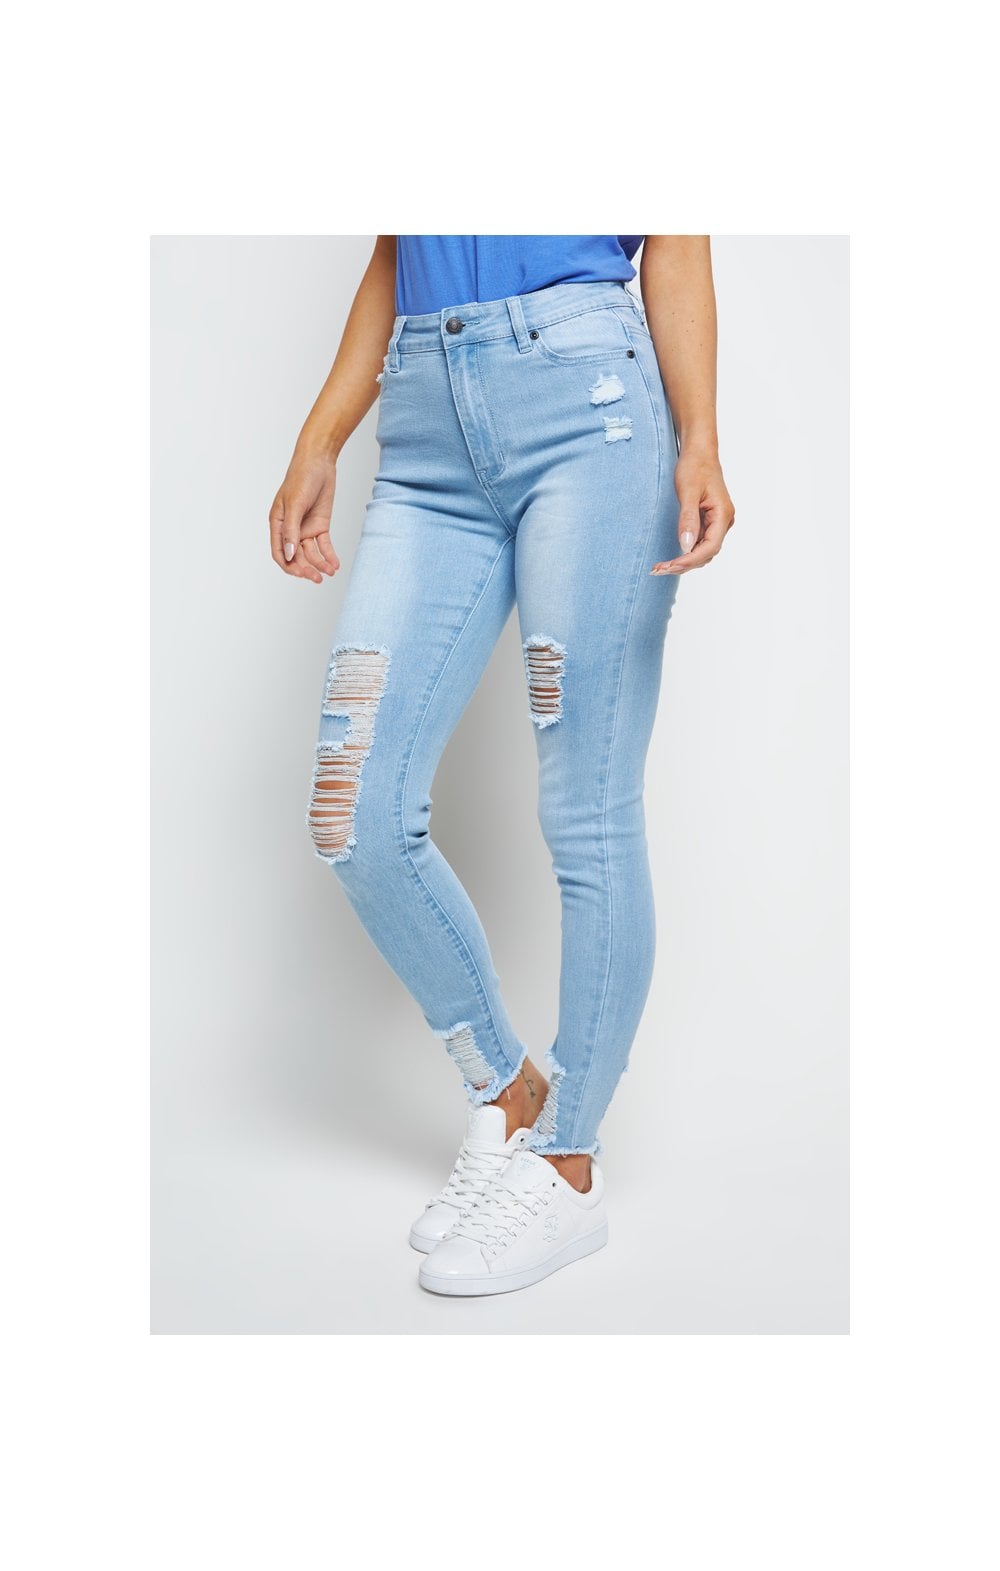 Load image into Gallery viewer, SikSilk Distressed Skinny Jeans - Ice Blue (3)